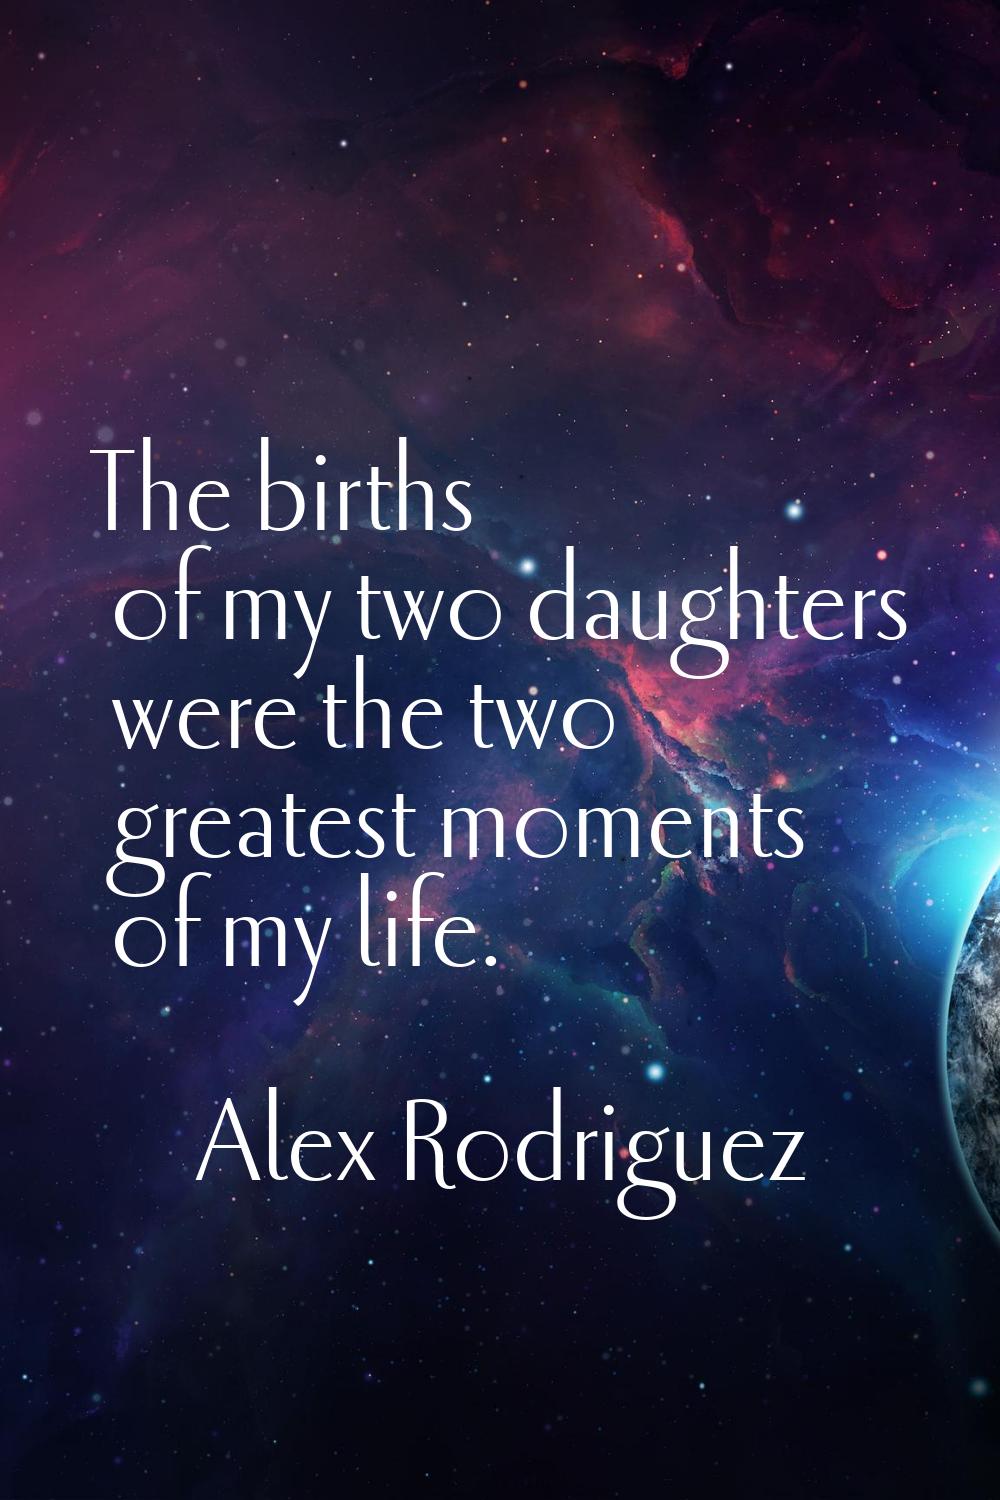 The births of my two daughters were the two greatest moments of my life.